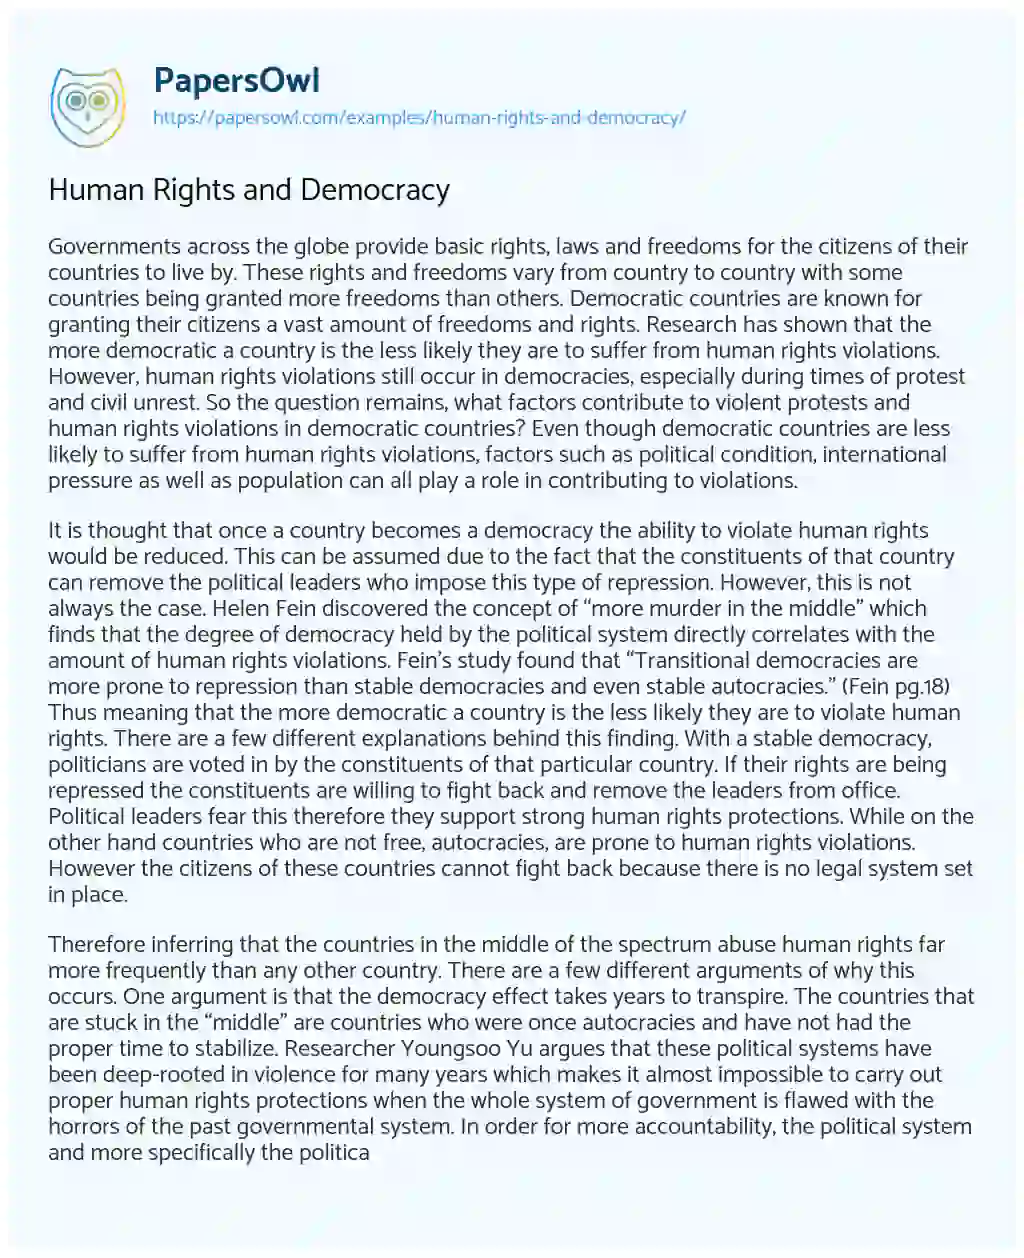 Essay on Human Rights and Democracy